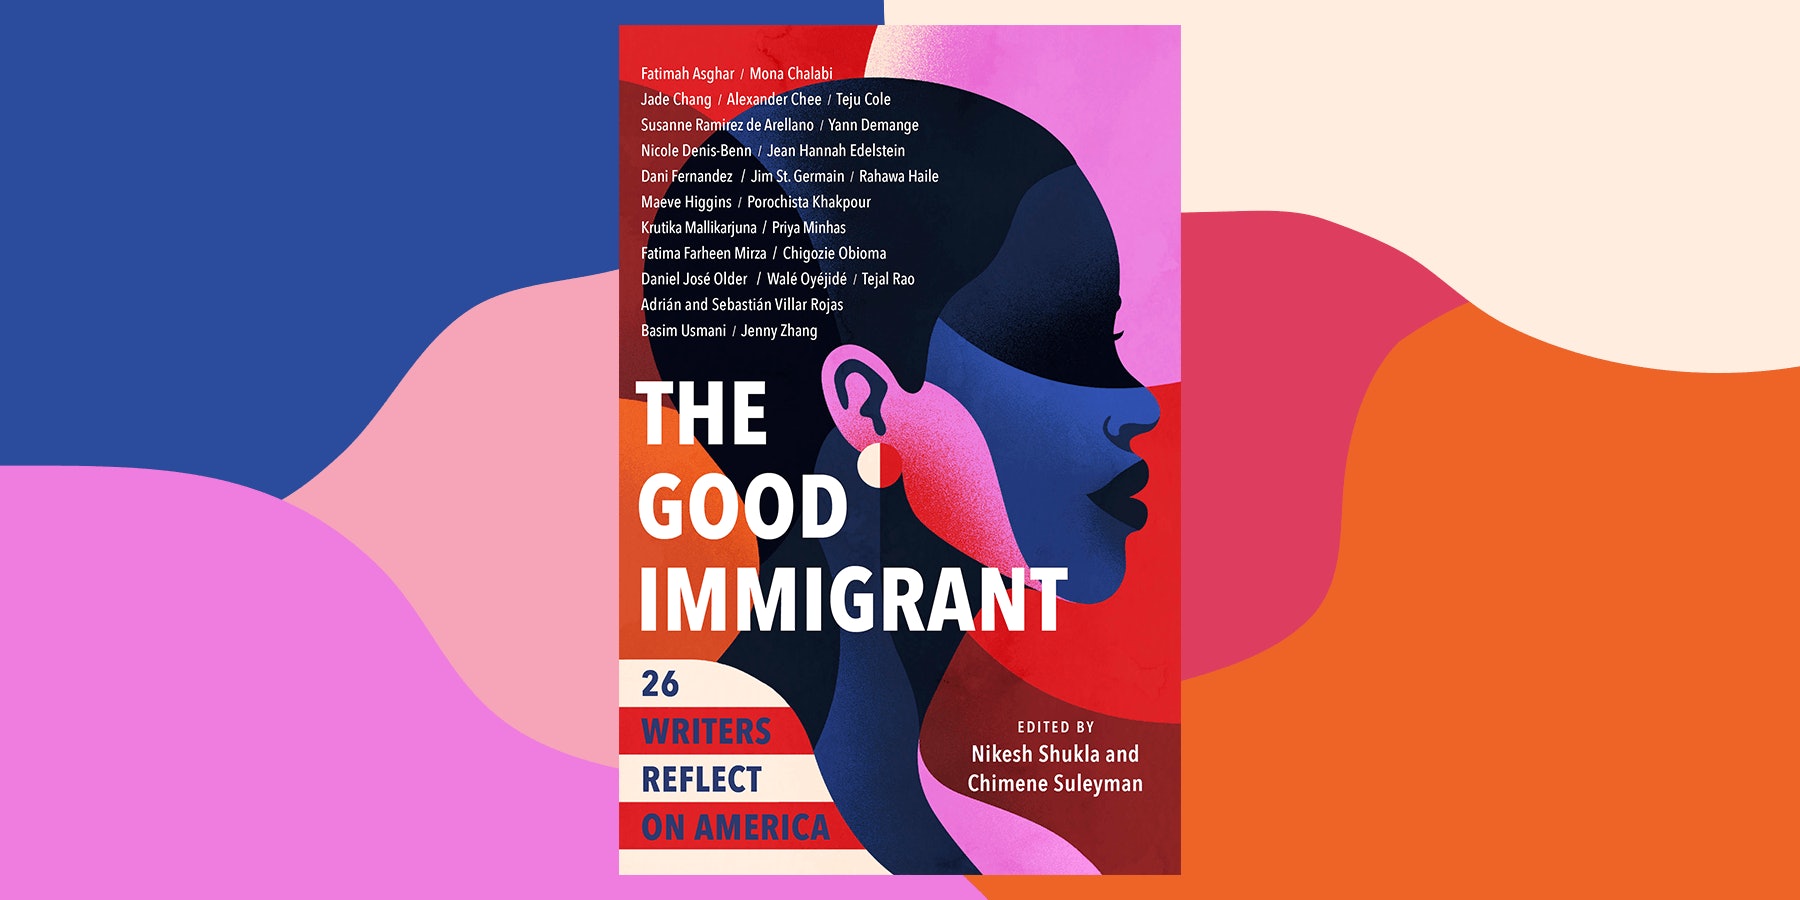 The Good Immigrant by Nikesh Shukla